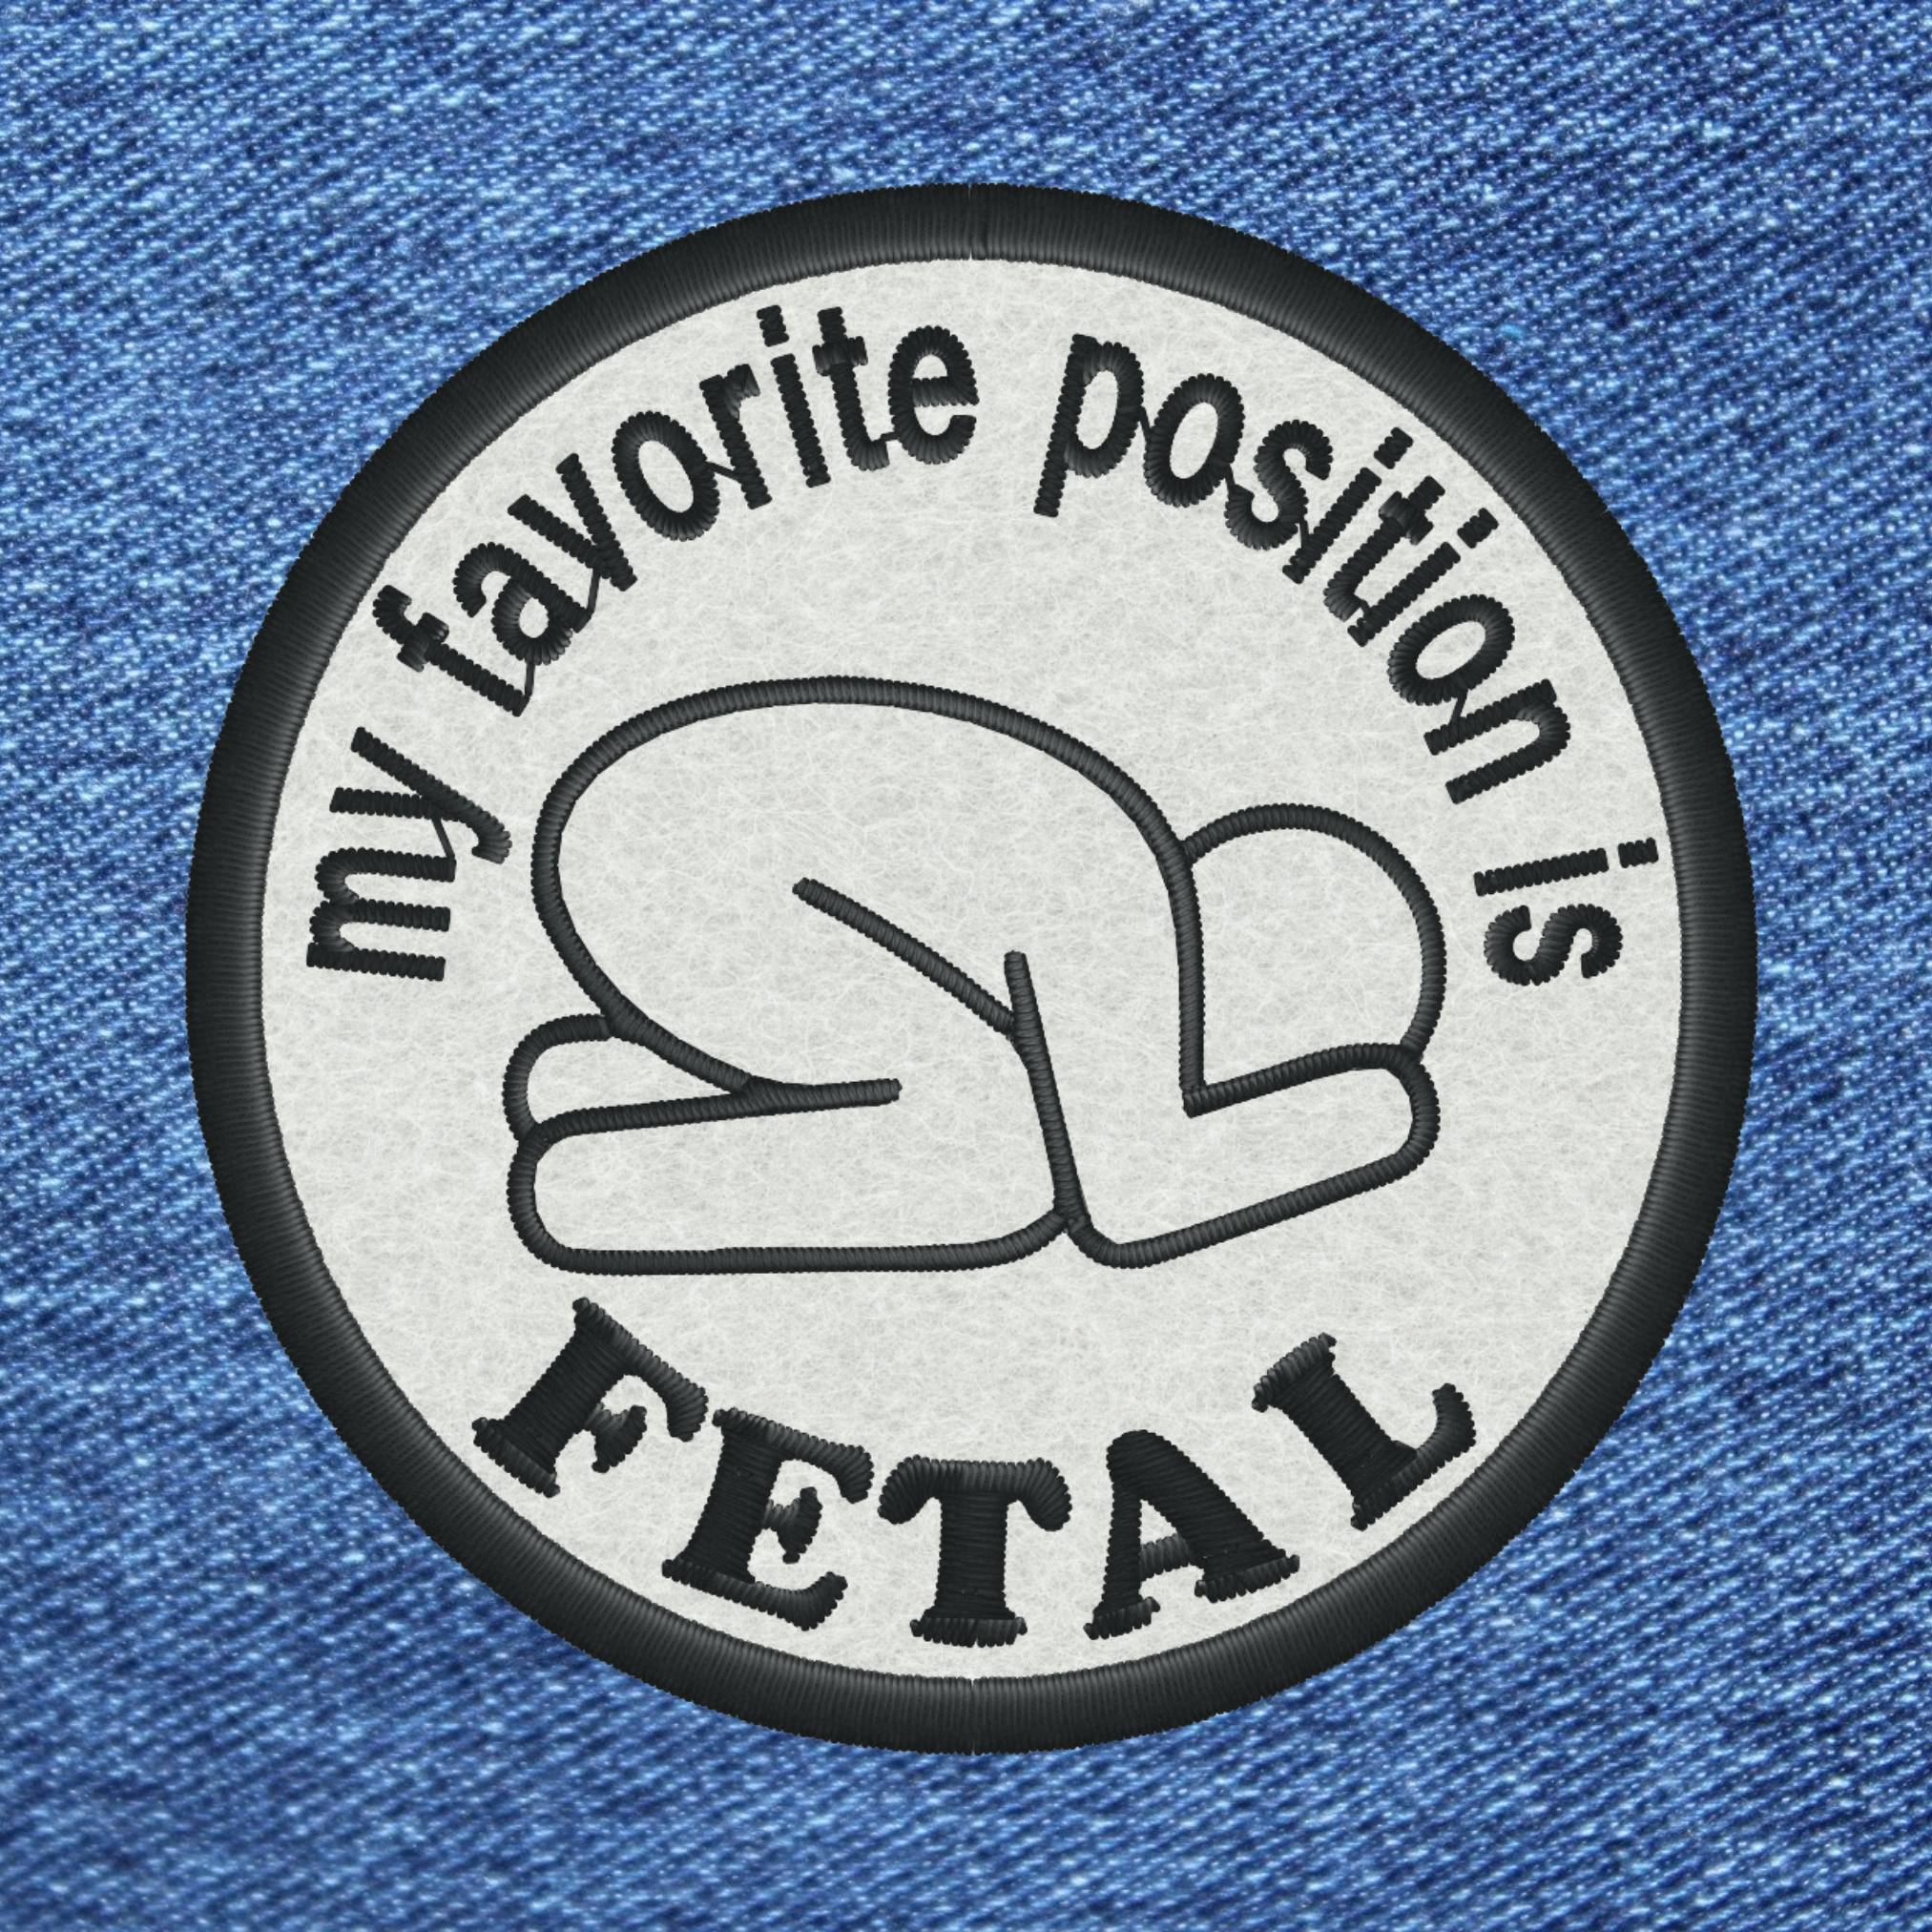 My Favorite Position is Fetal Embroidered Iron-on Patch